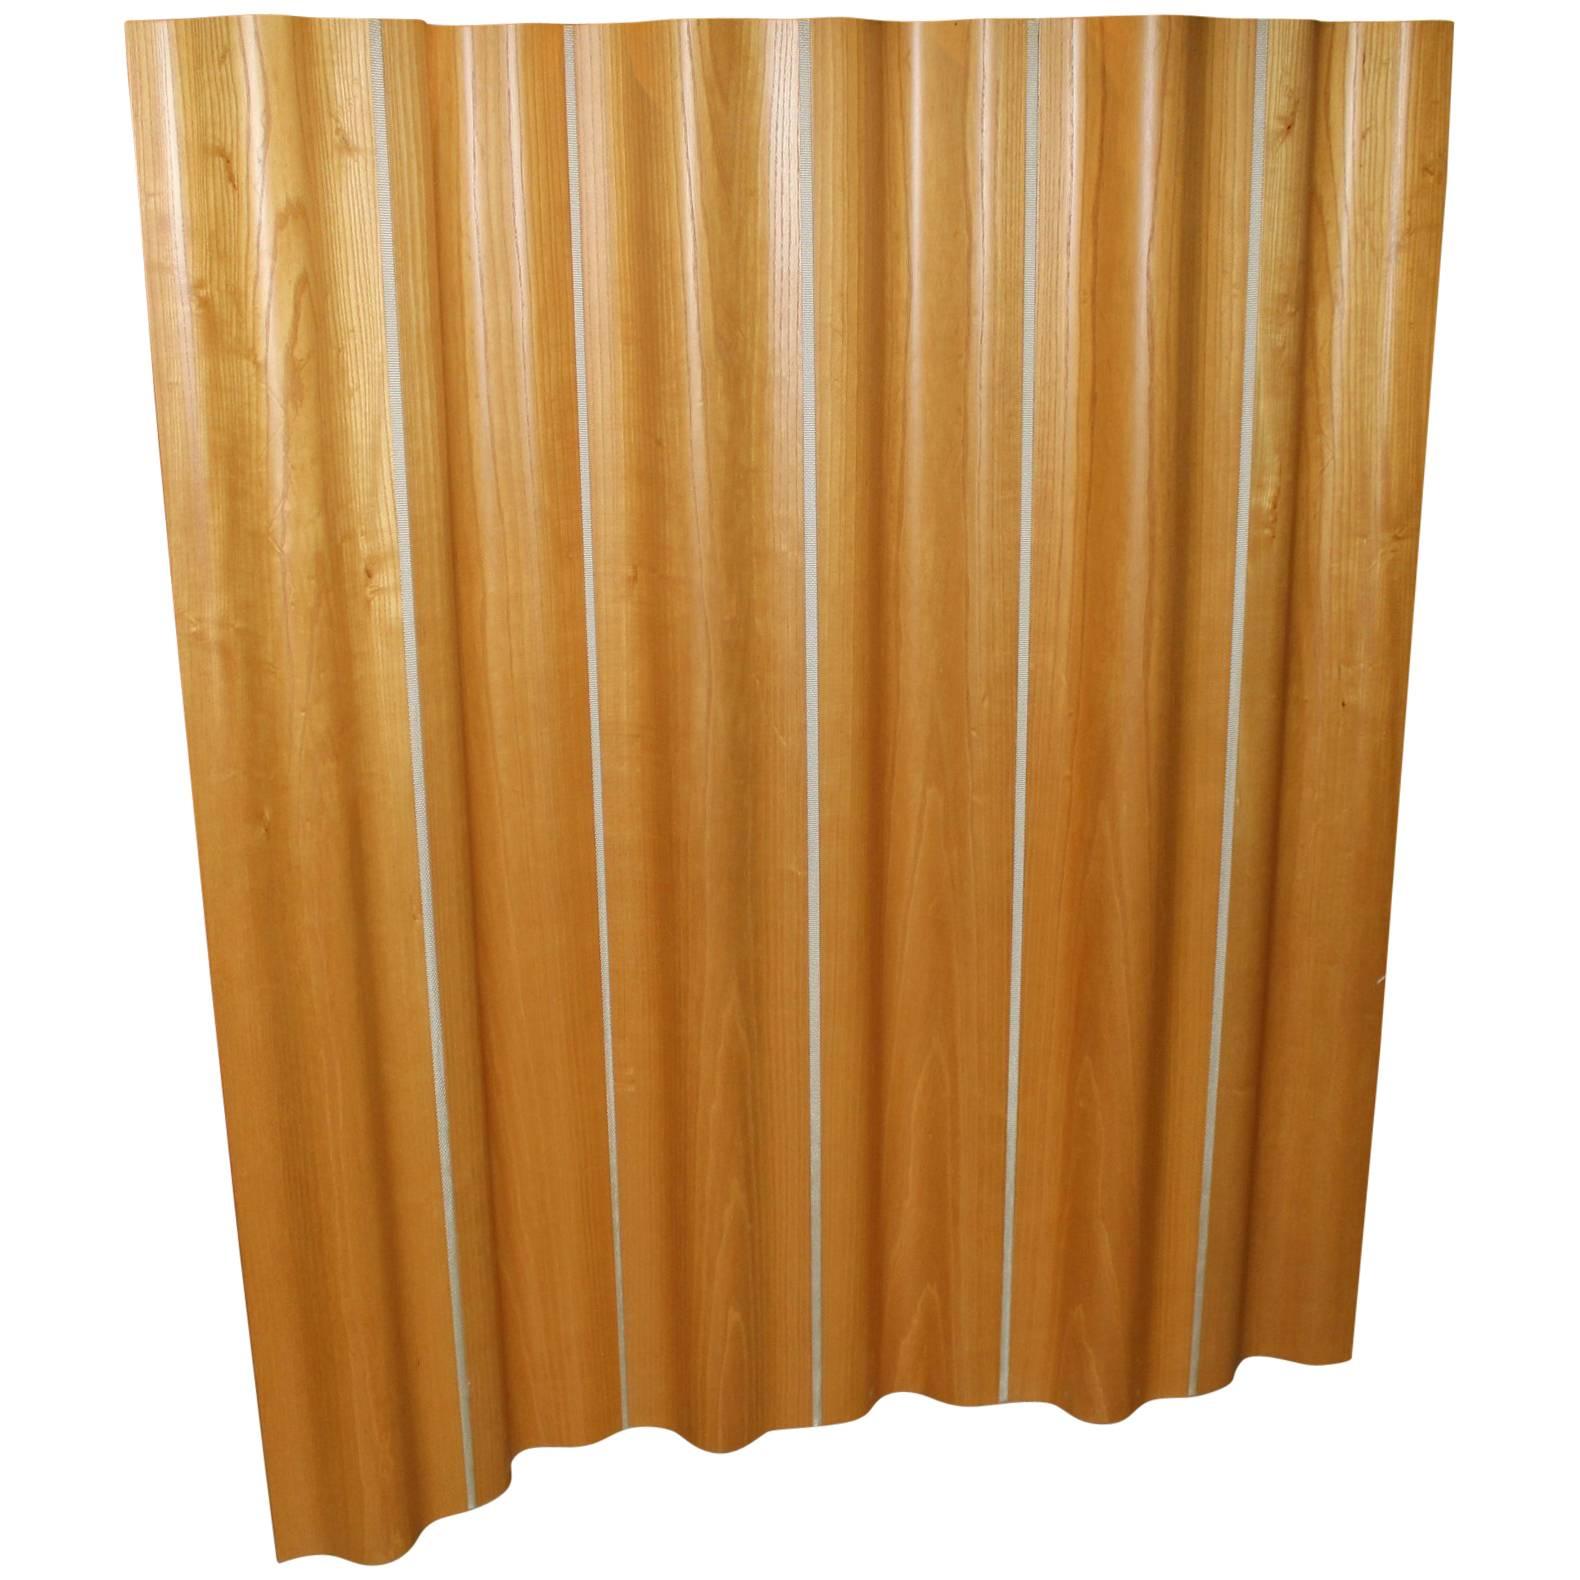 Eames Birch Plywood Six Panel Folding Screen for Herman Miller